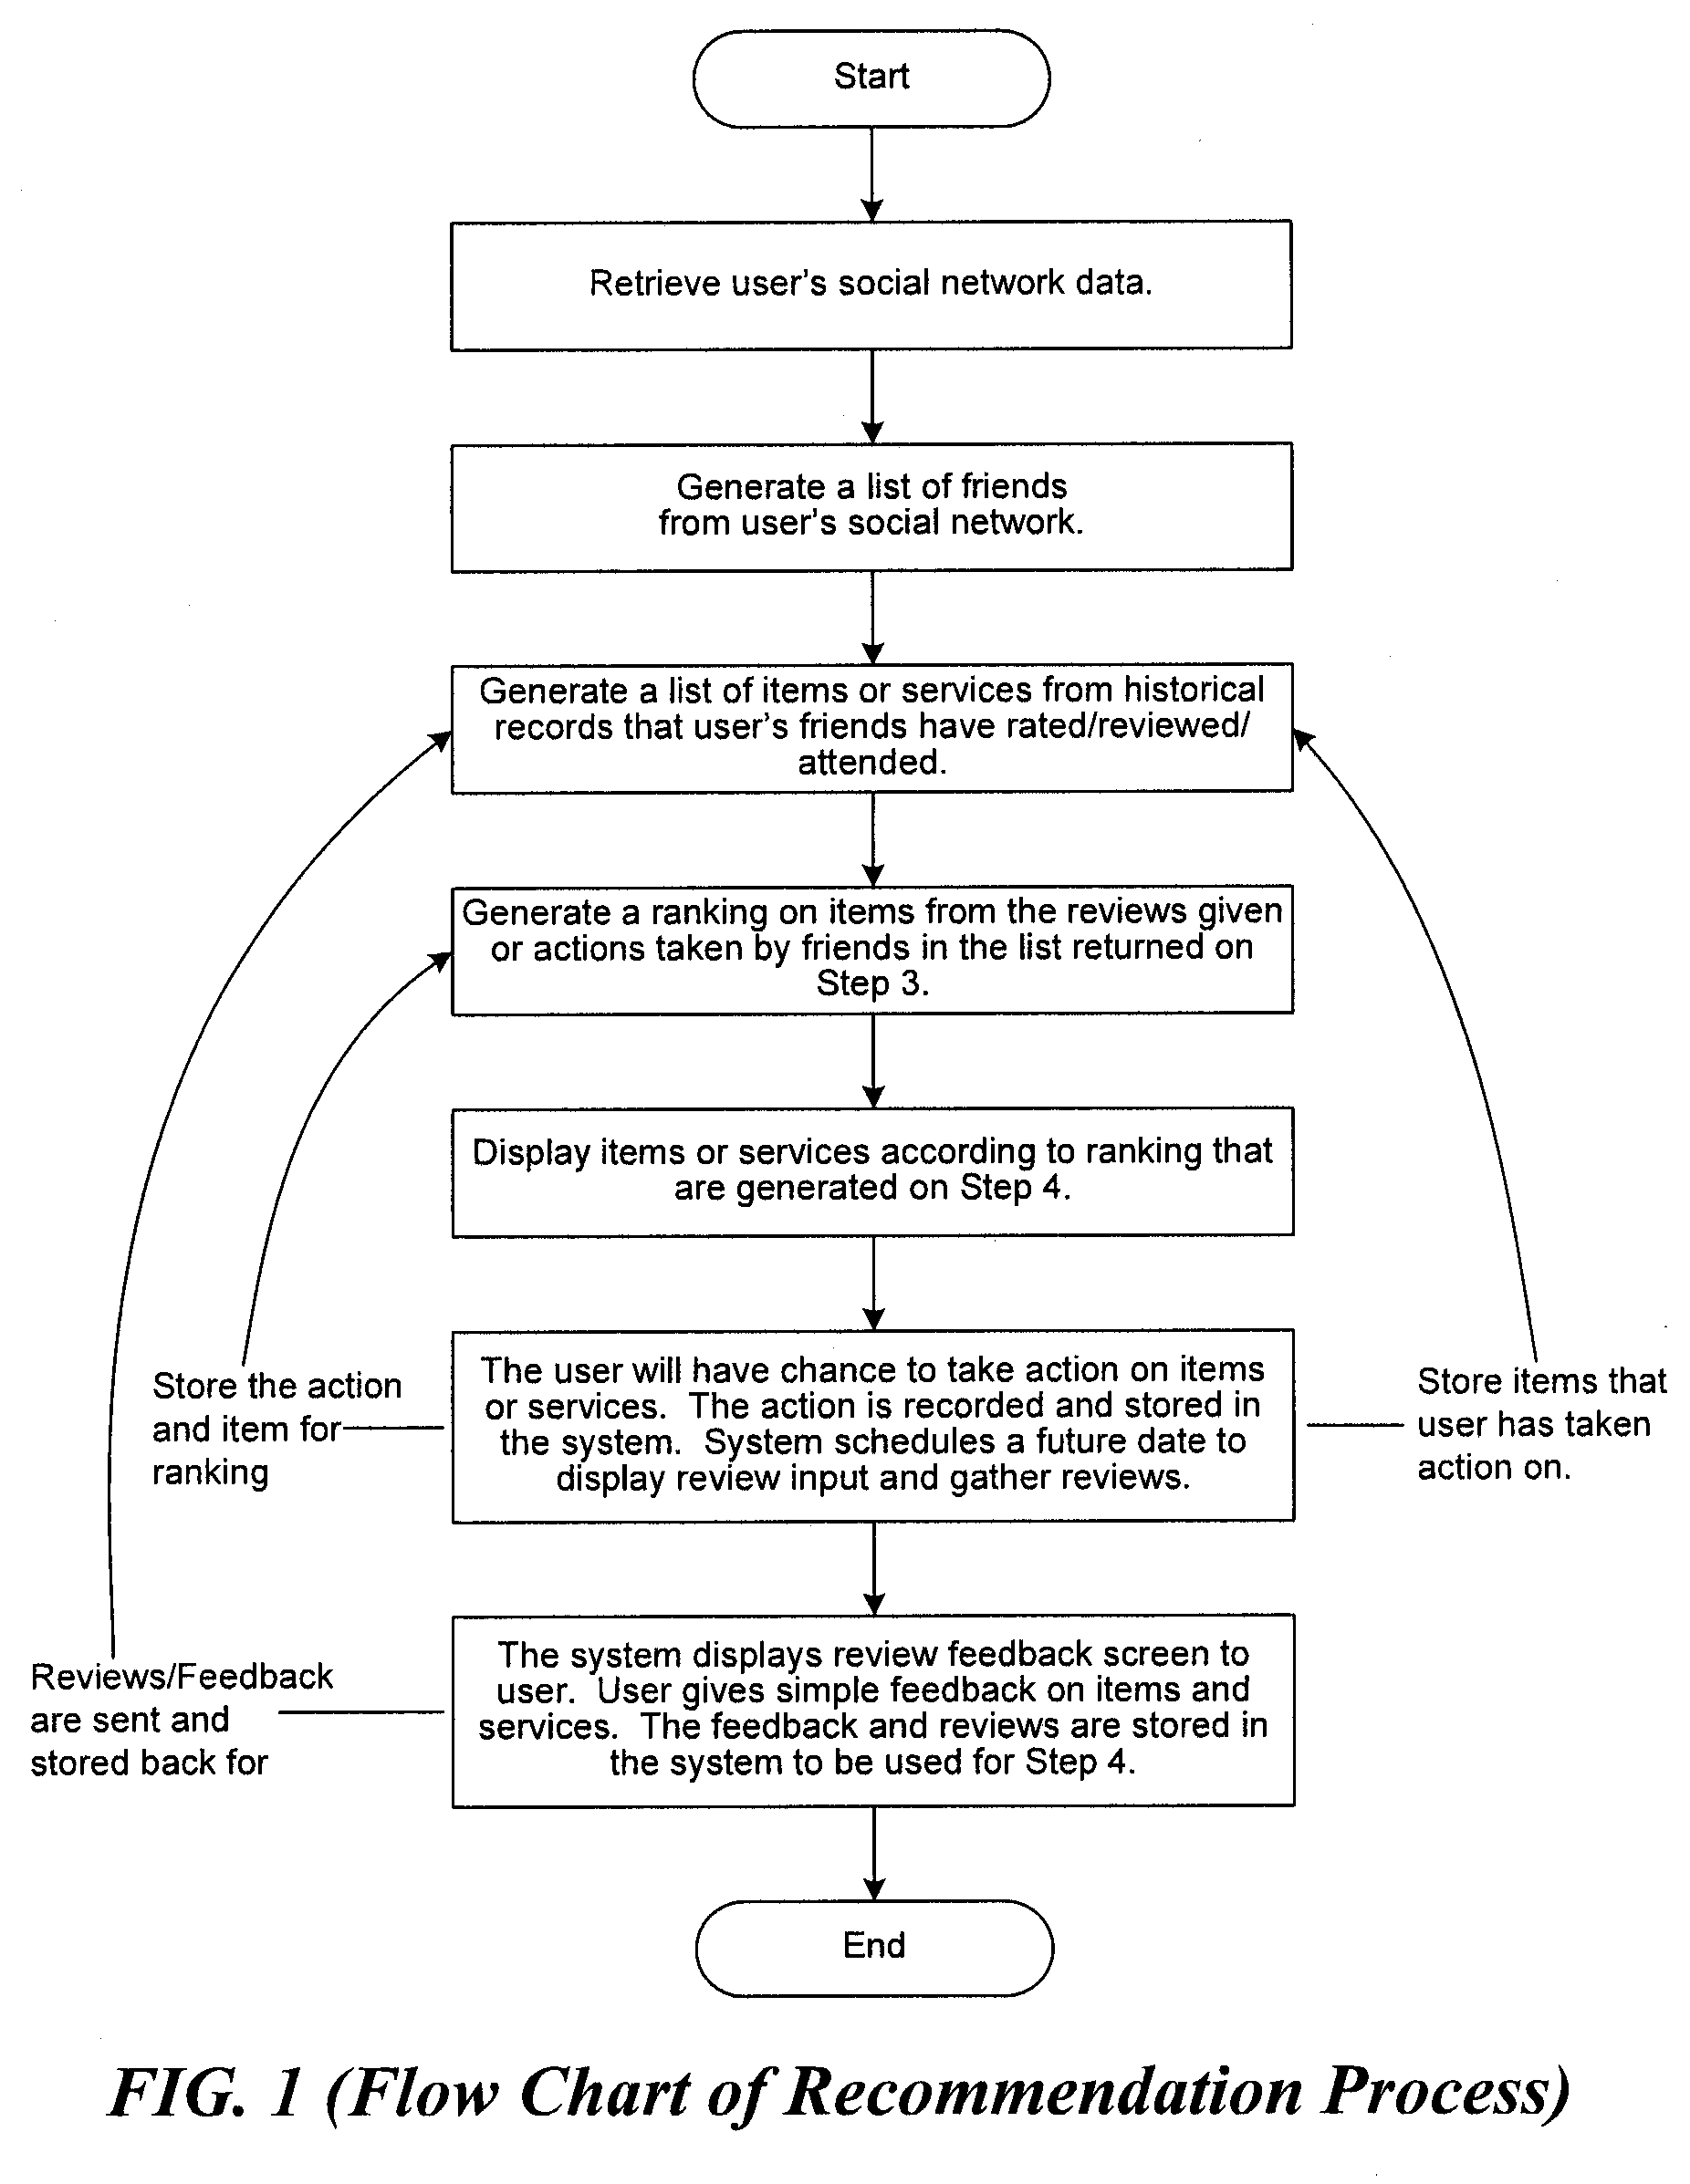 System and method for recommending venues and events of interest to a user